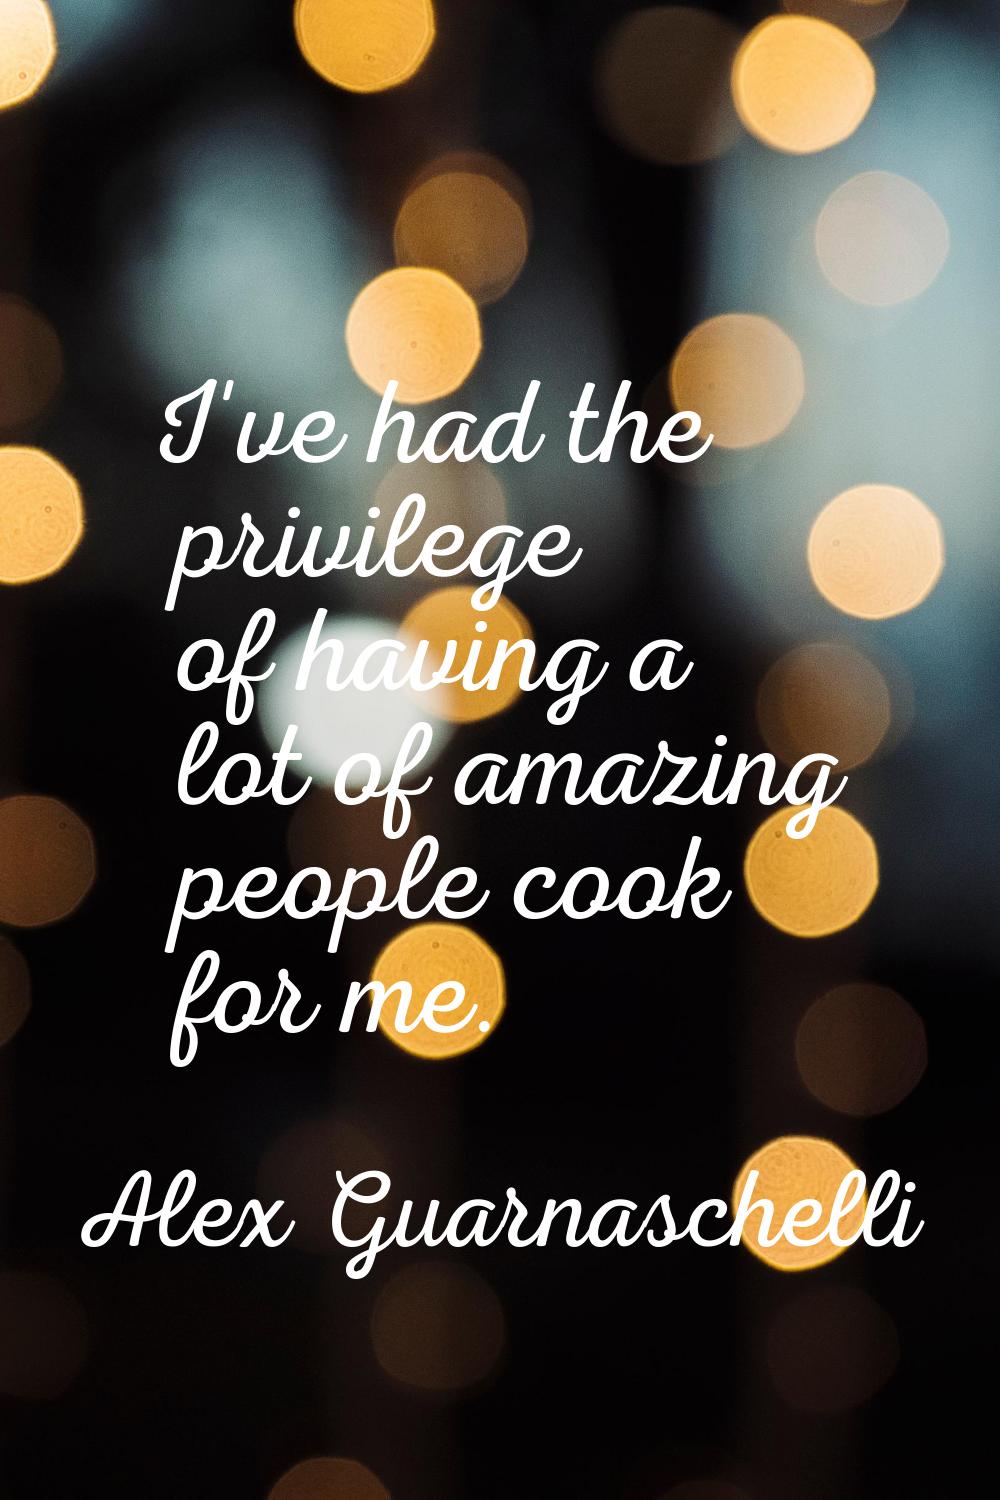 I've had the privilege of having a lot of amazing people cook for me.